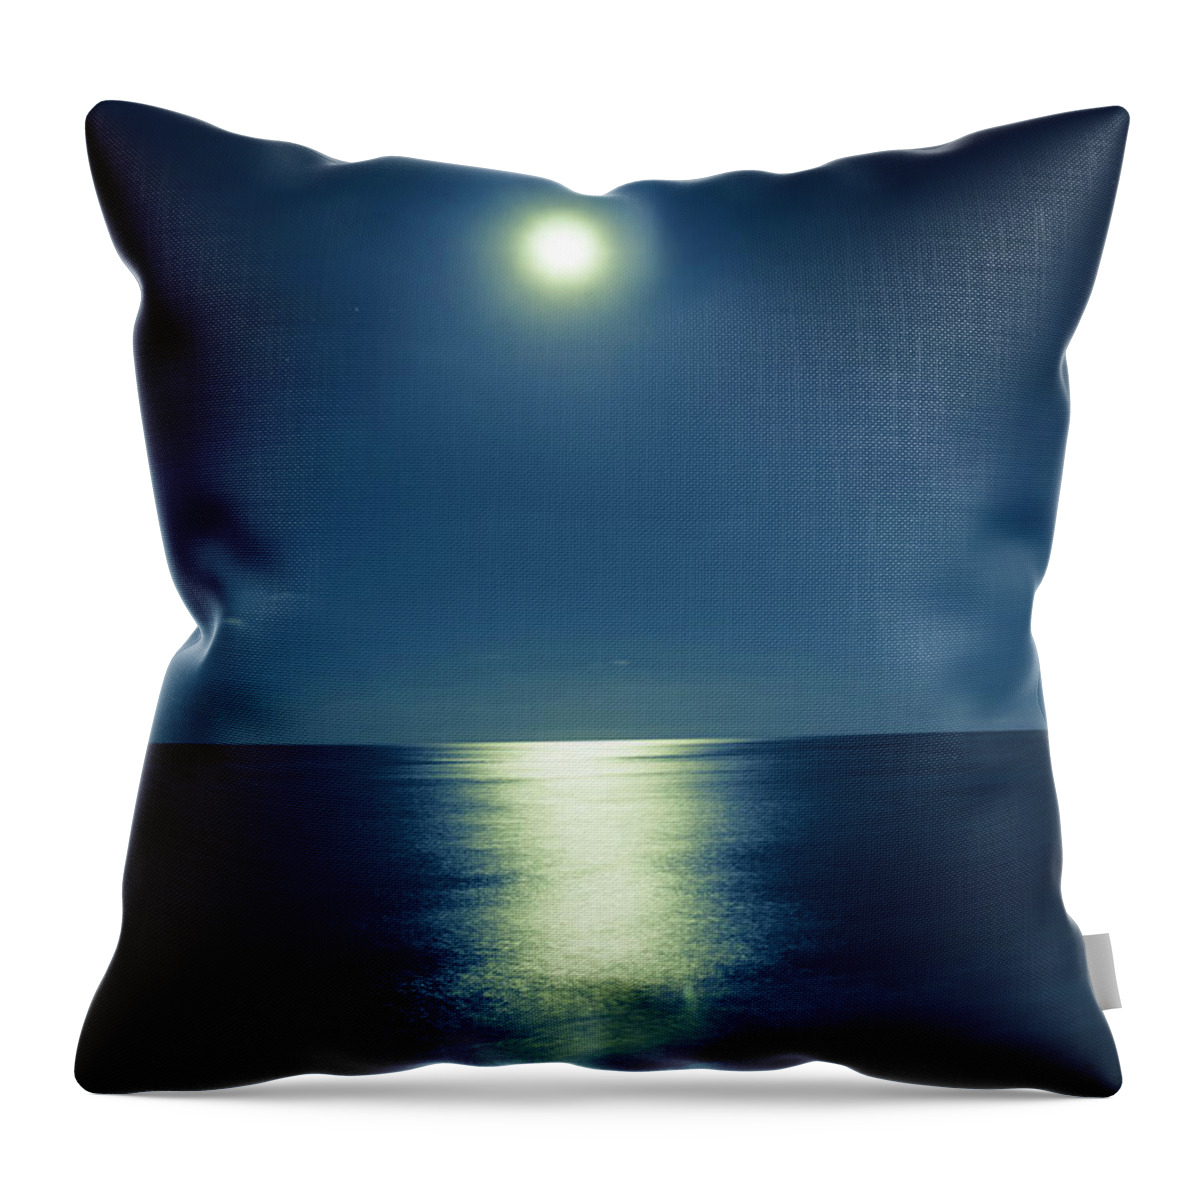 Scenics Throw Pillow featuring the photograph Romantic Moonlit Night Over Ocean by Jaminwell